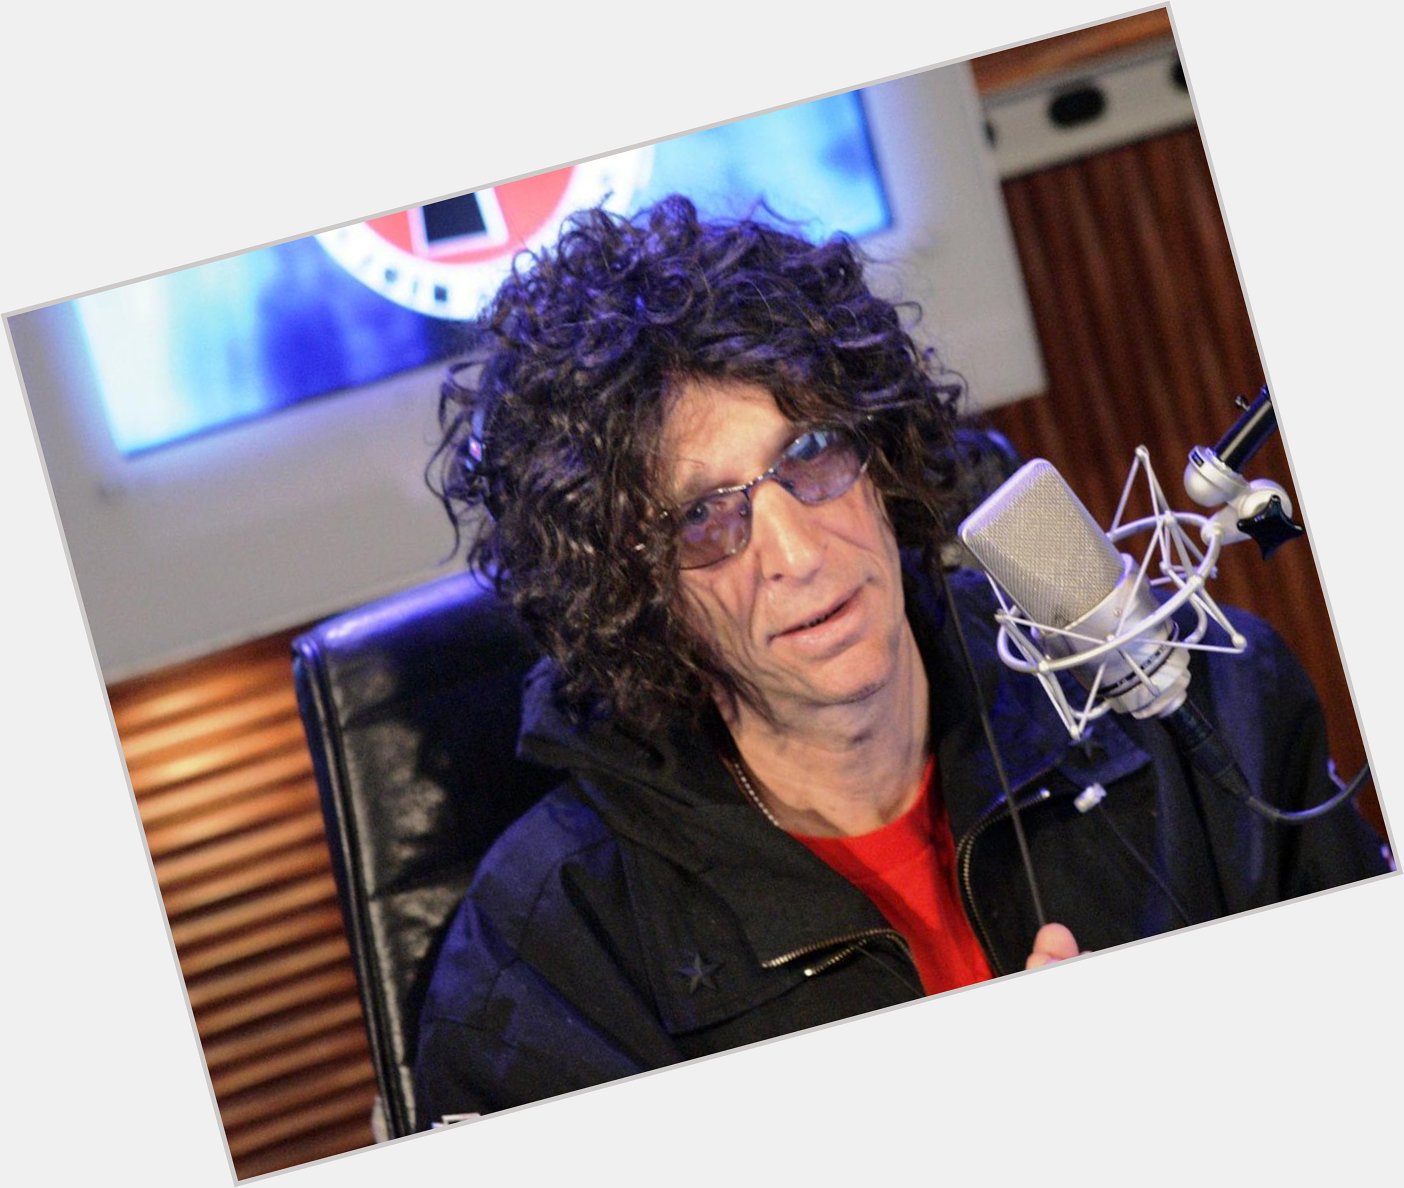 Happy Birthday to Howard Stern, who turns 61 today! 